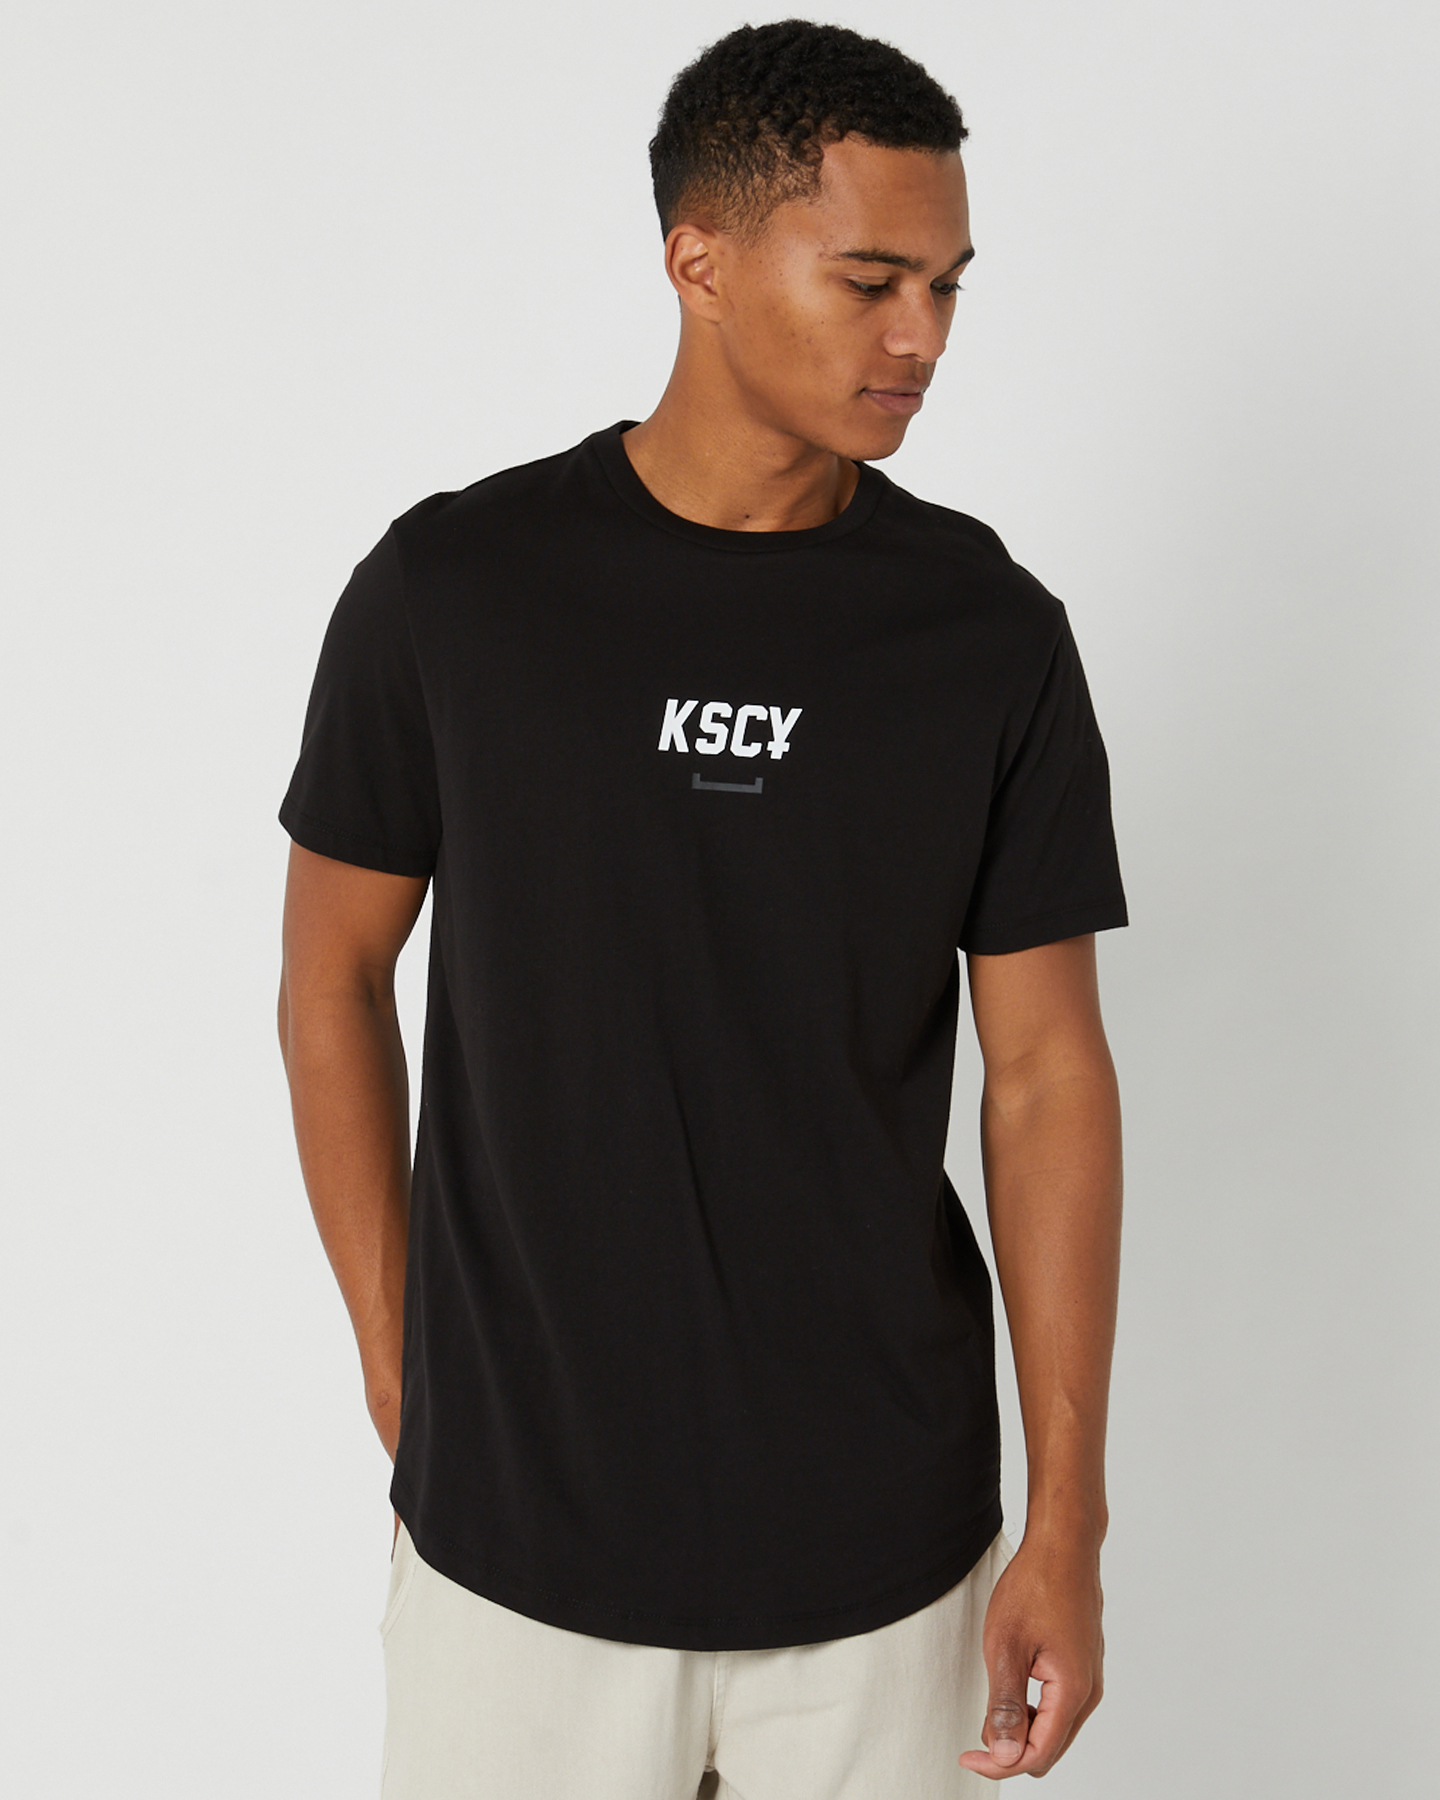 Kiss Chacey Formula Dual Curved Tee - Jet Black | SurfStitch